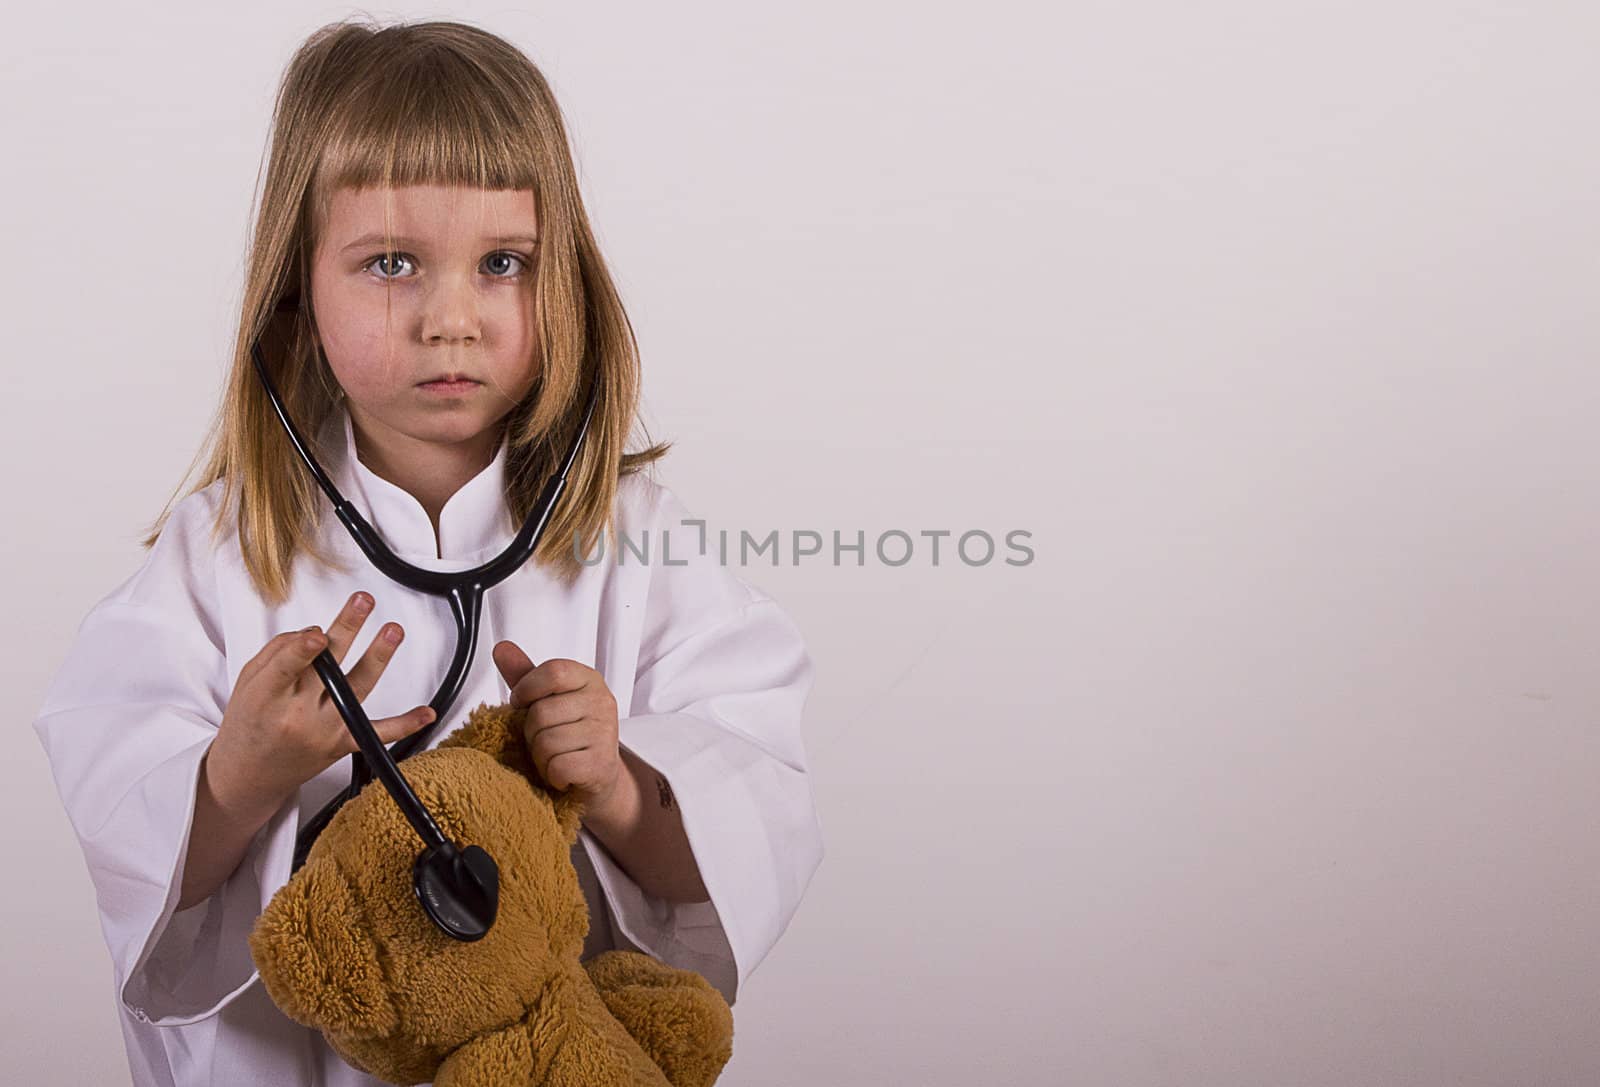 little girl is examinating her bear, little doctor with stethoscope